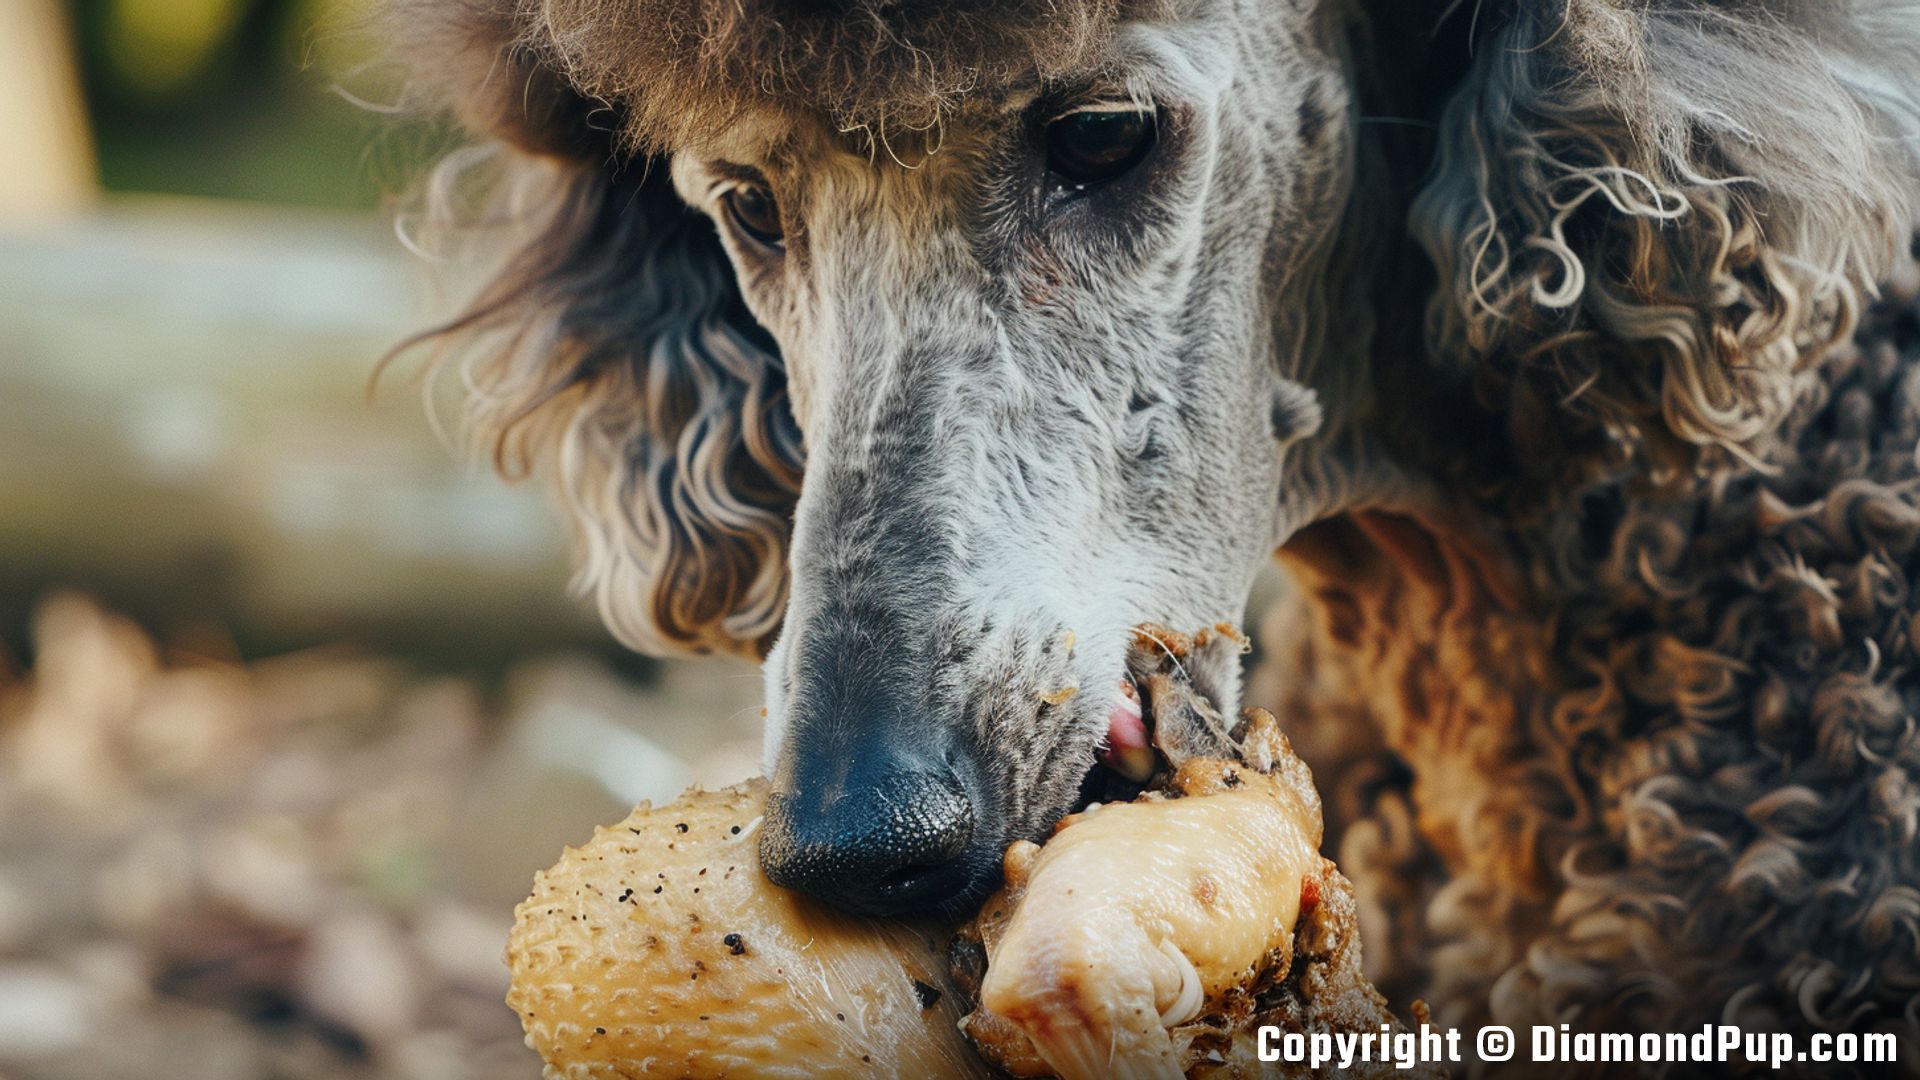 Photograph of an Adorable Poodle Eating Chicken